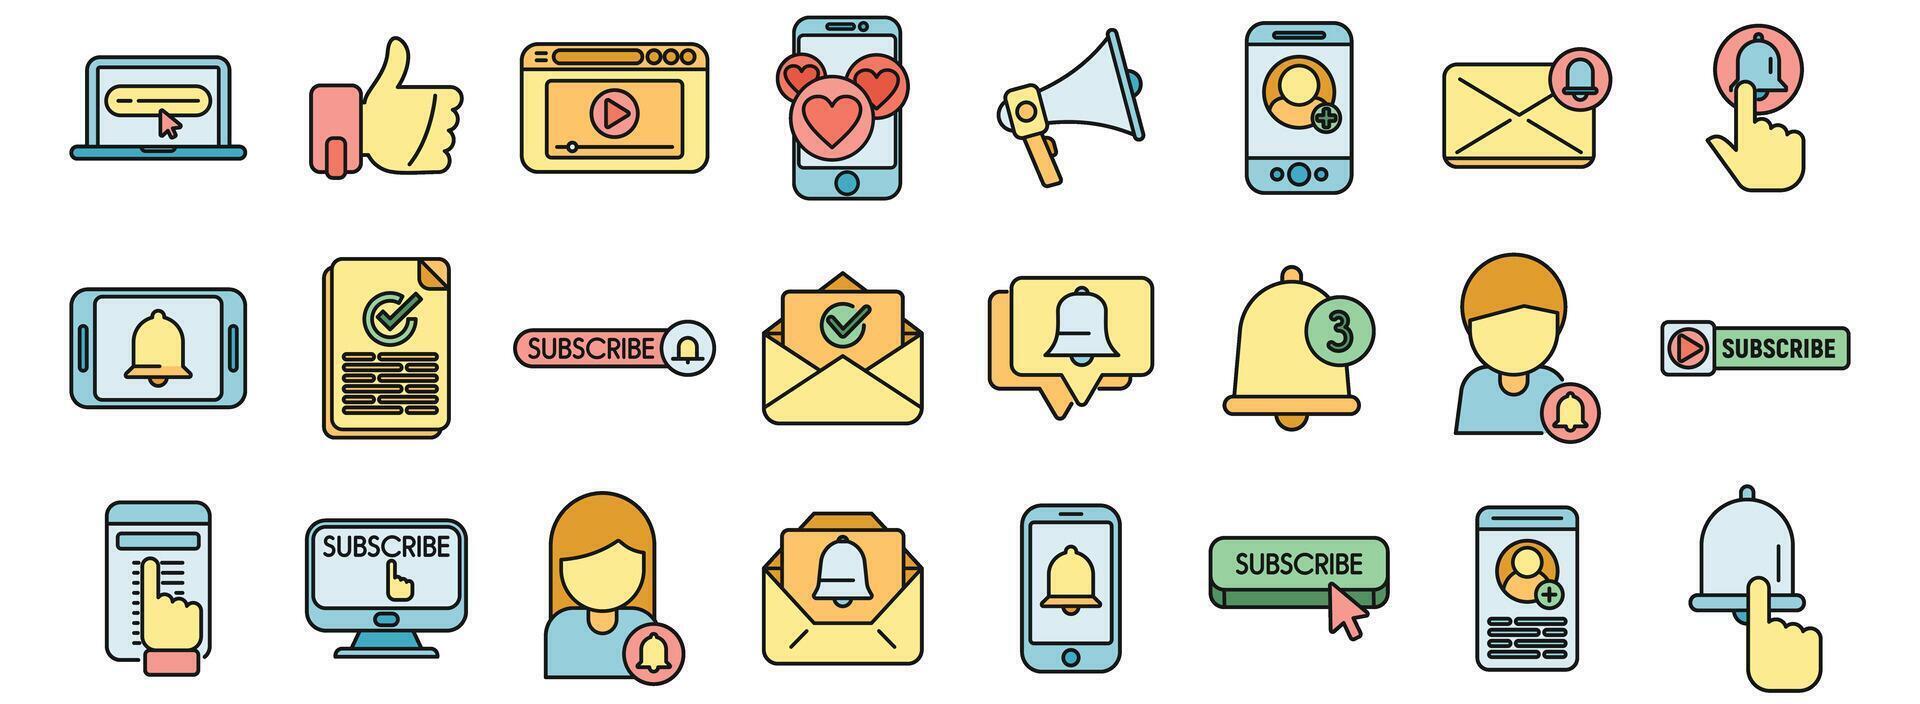 Subscribe icons set color line vector